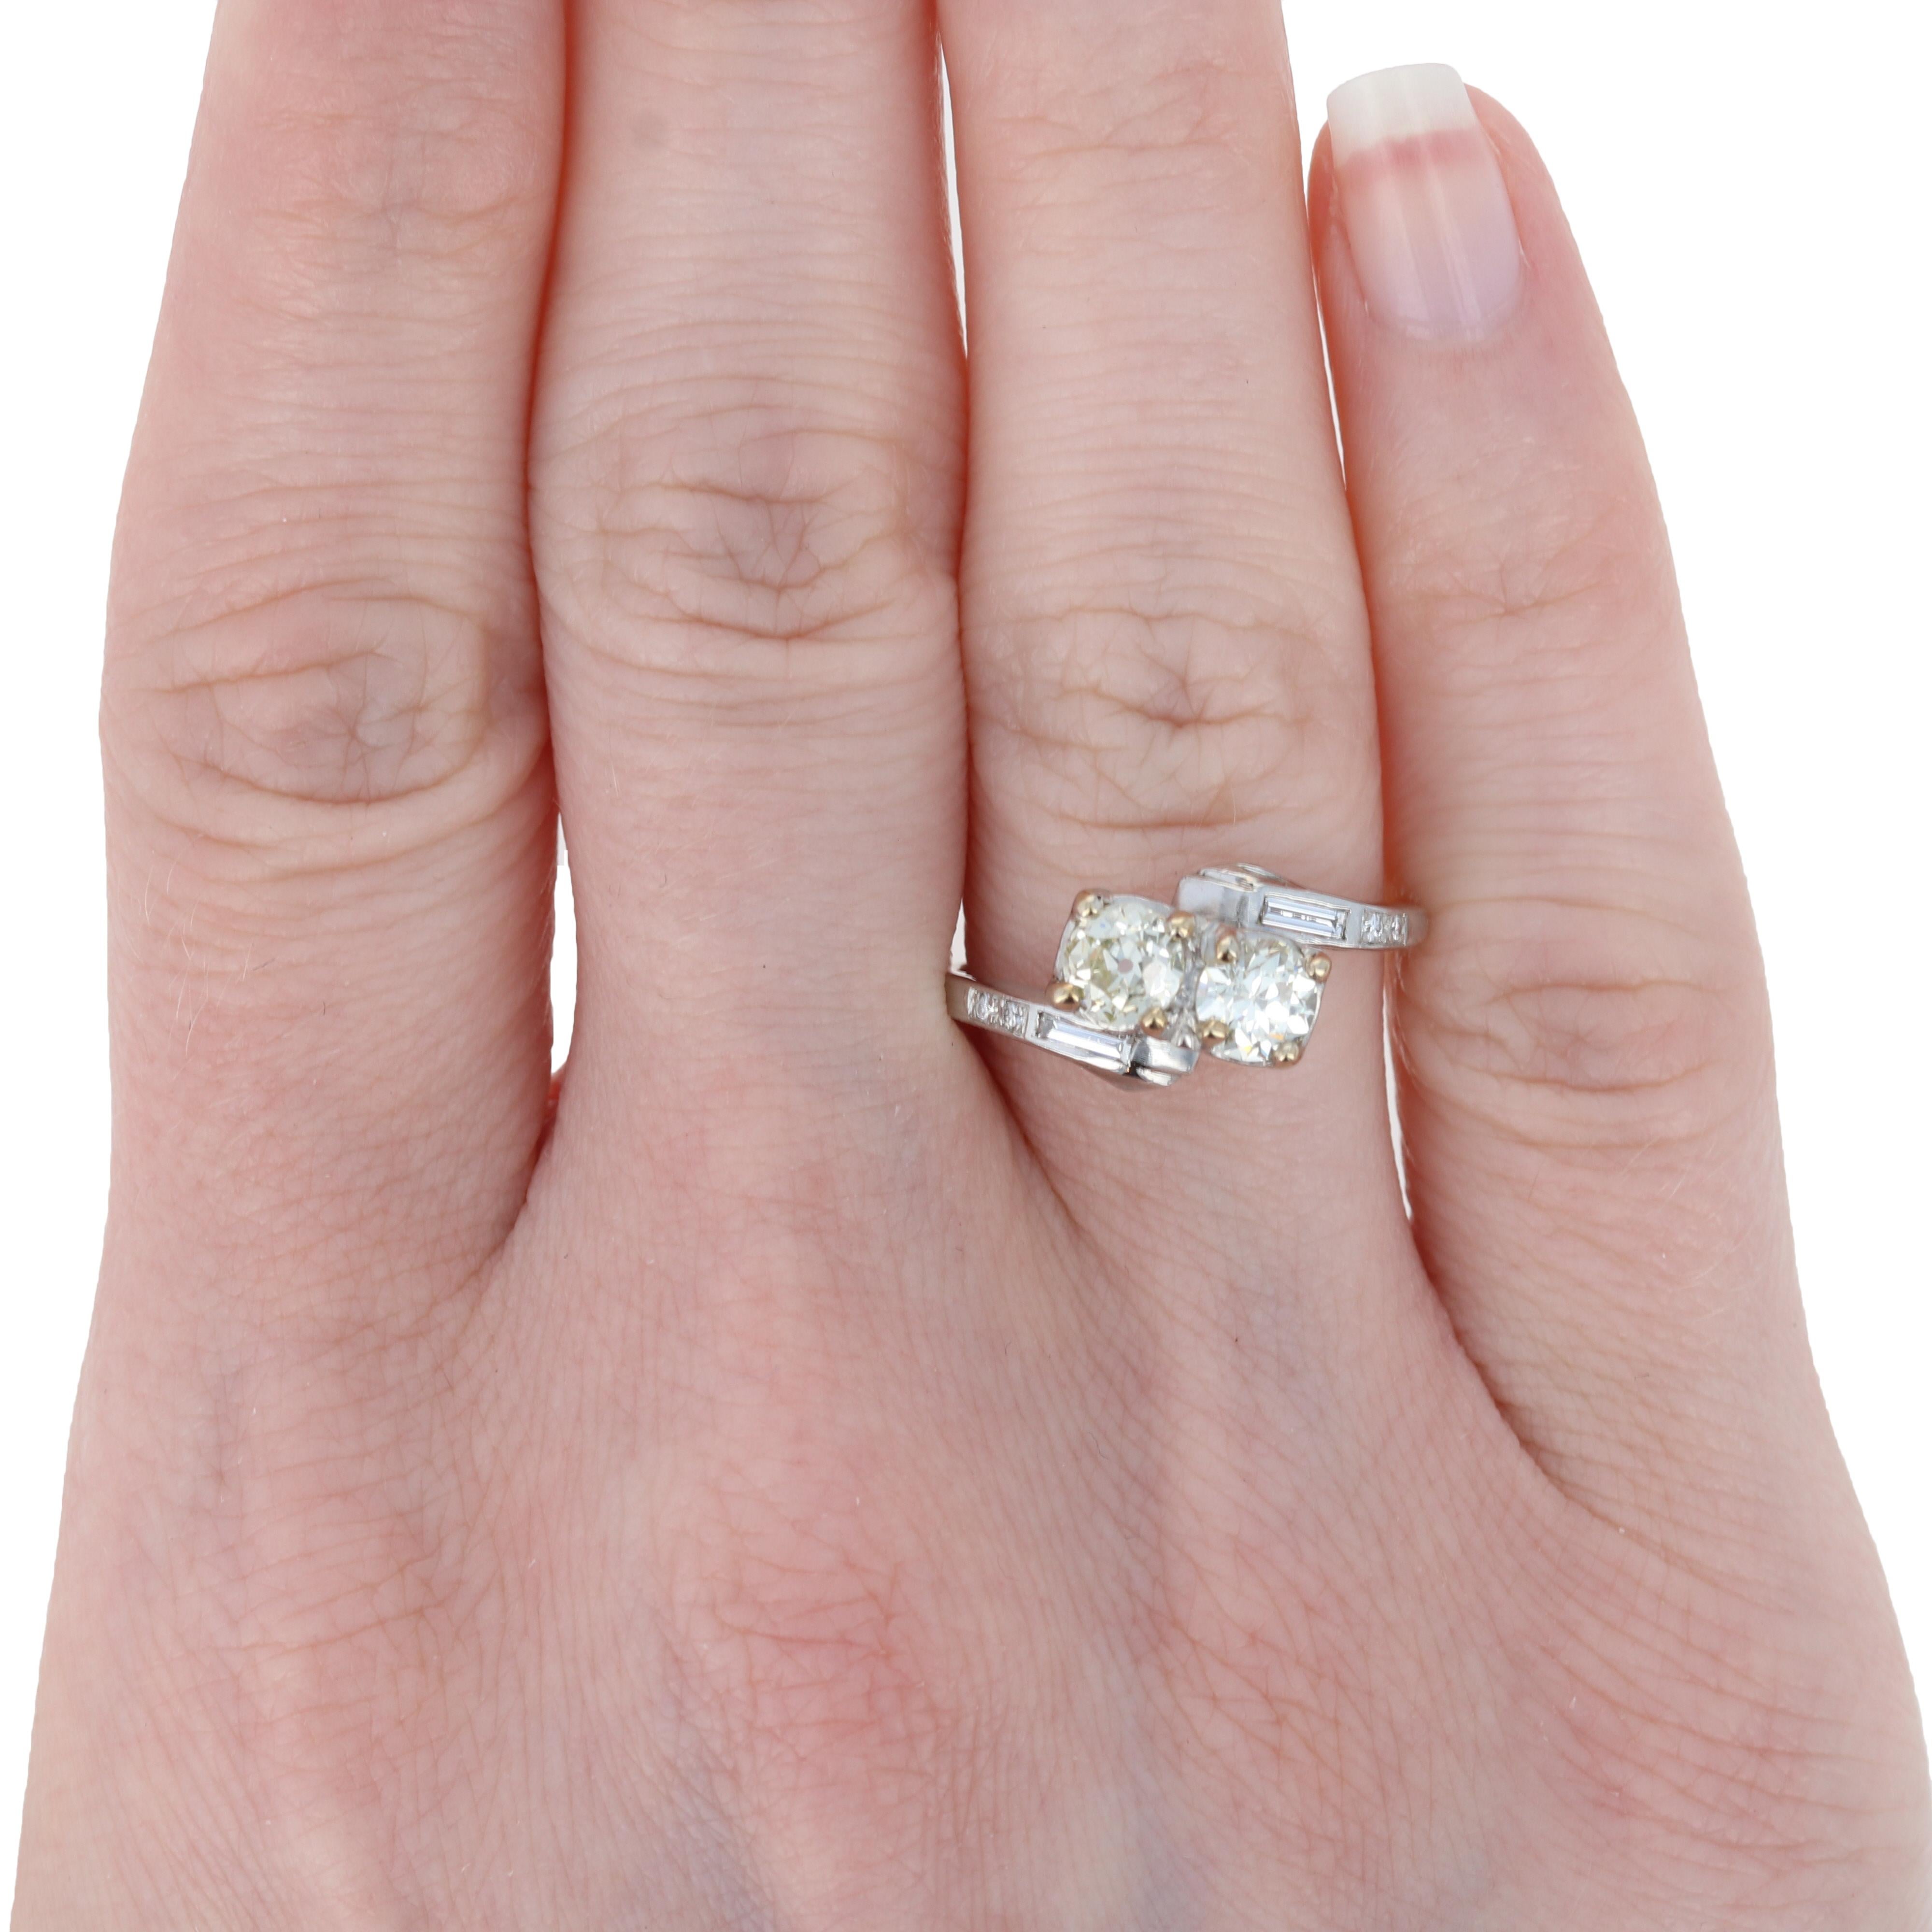 Propose in style with this gorgeous engagement ring! Fashioned in 14k white gold and palladium, a precious metal in the platinum family, this stunning piece features a bypass band adorned with natural diamonds. Two Old European cut diamonds take